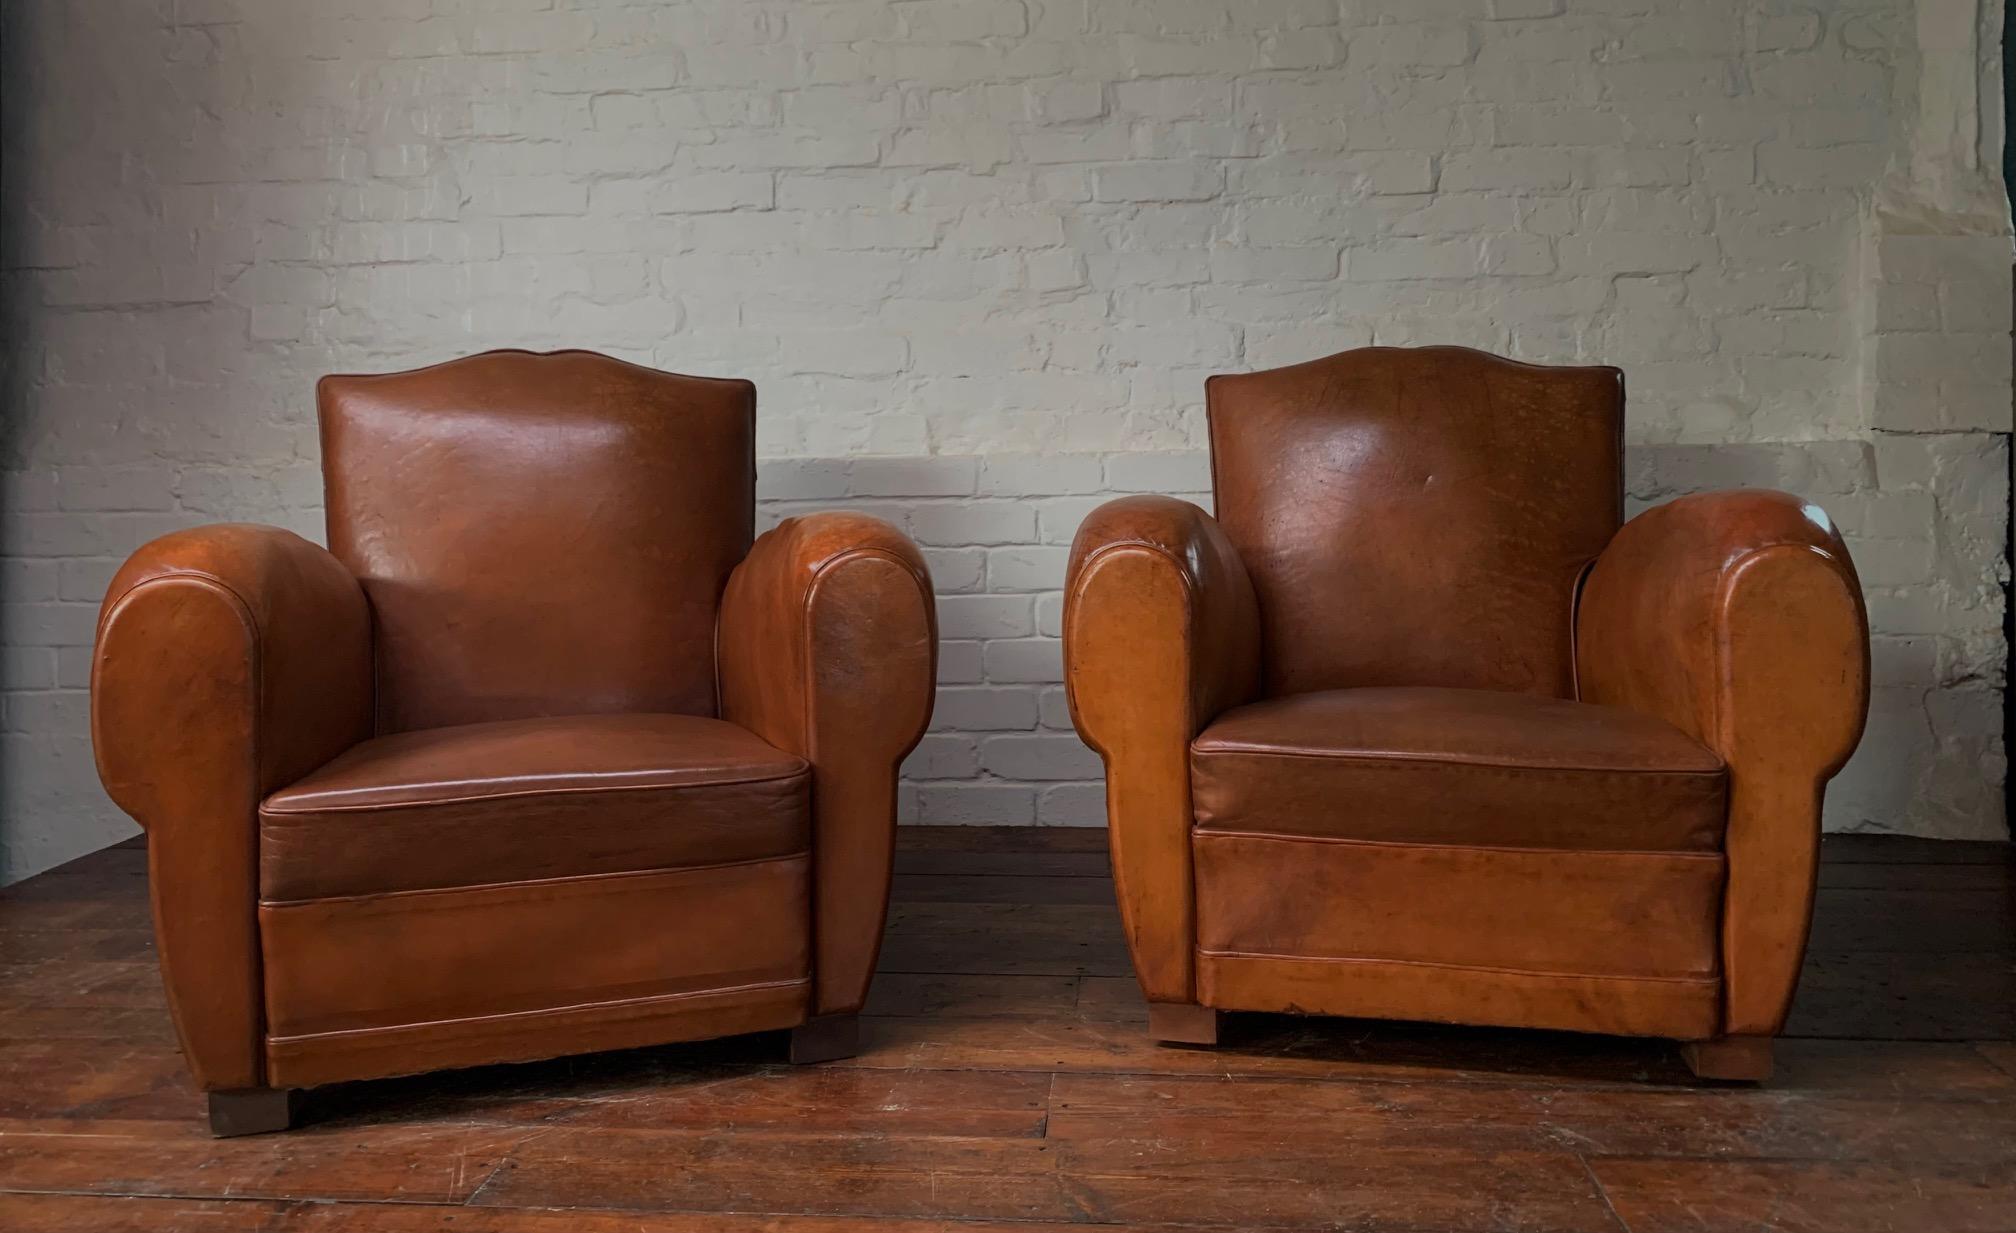 A Stunning Pair of French Leather Club Chairs, Caramel Moustache Models, C1940's 3